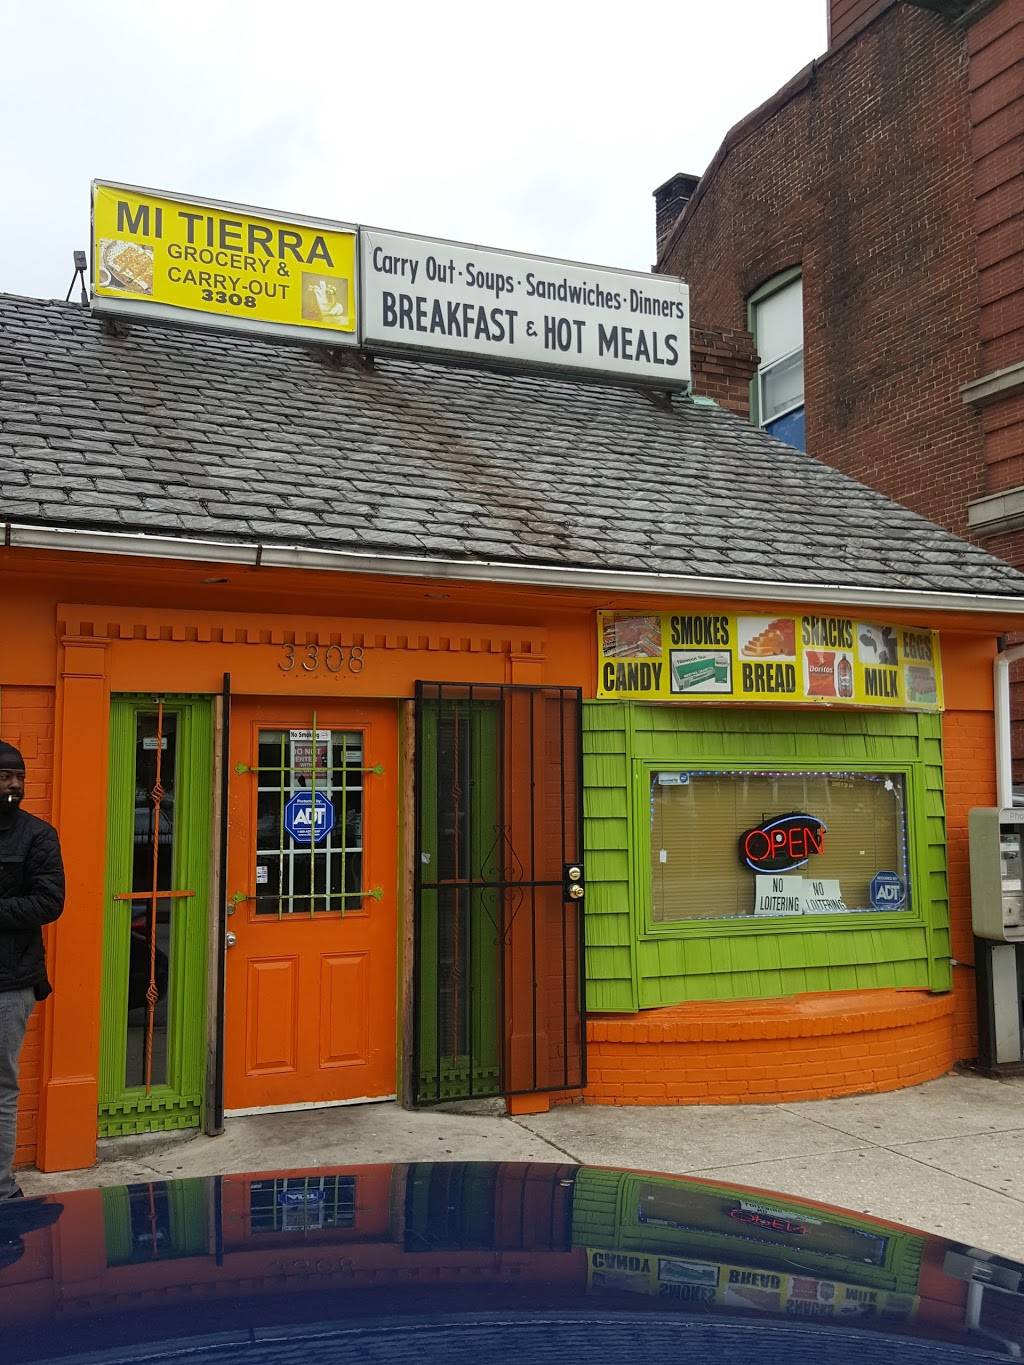 Mi Tierra carryout and grocery | restaurant | 3308 Garrison Blvd, Baltimore, MD 21216, USA | 4106640328 OR +1 410-664-0328